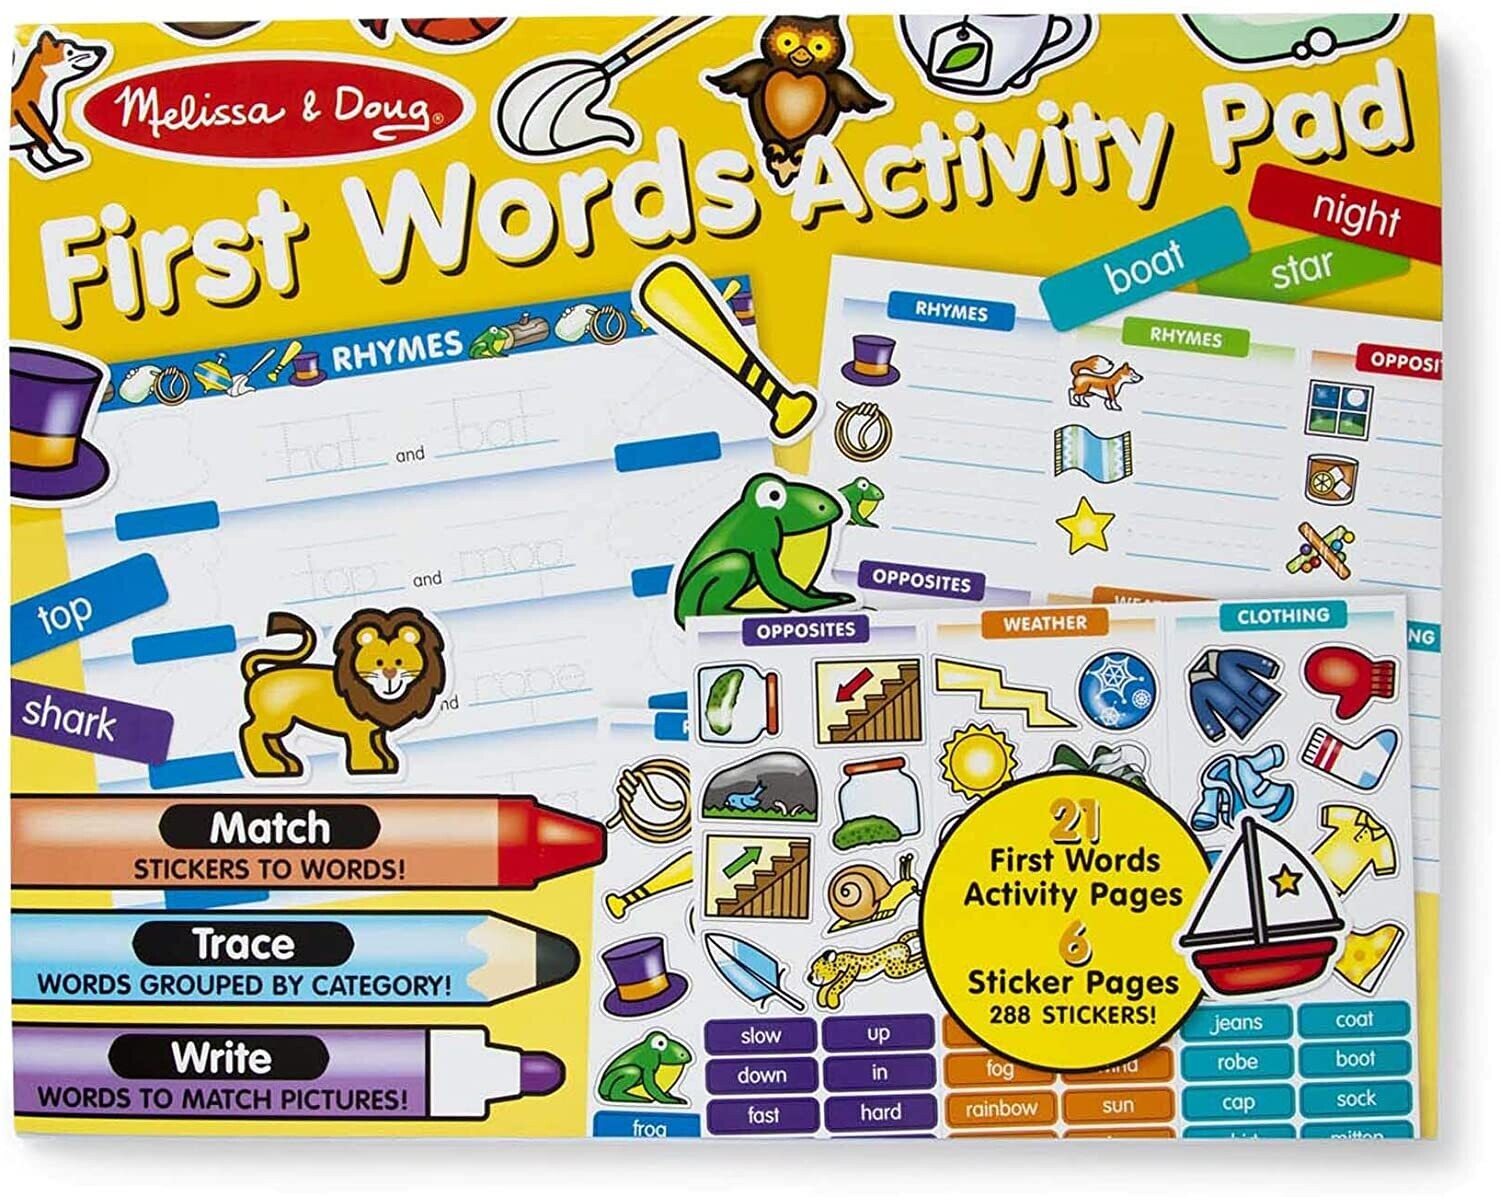 MD First Words Activity Pad